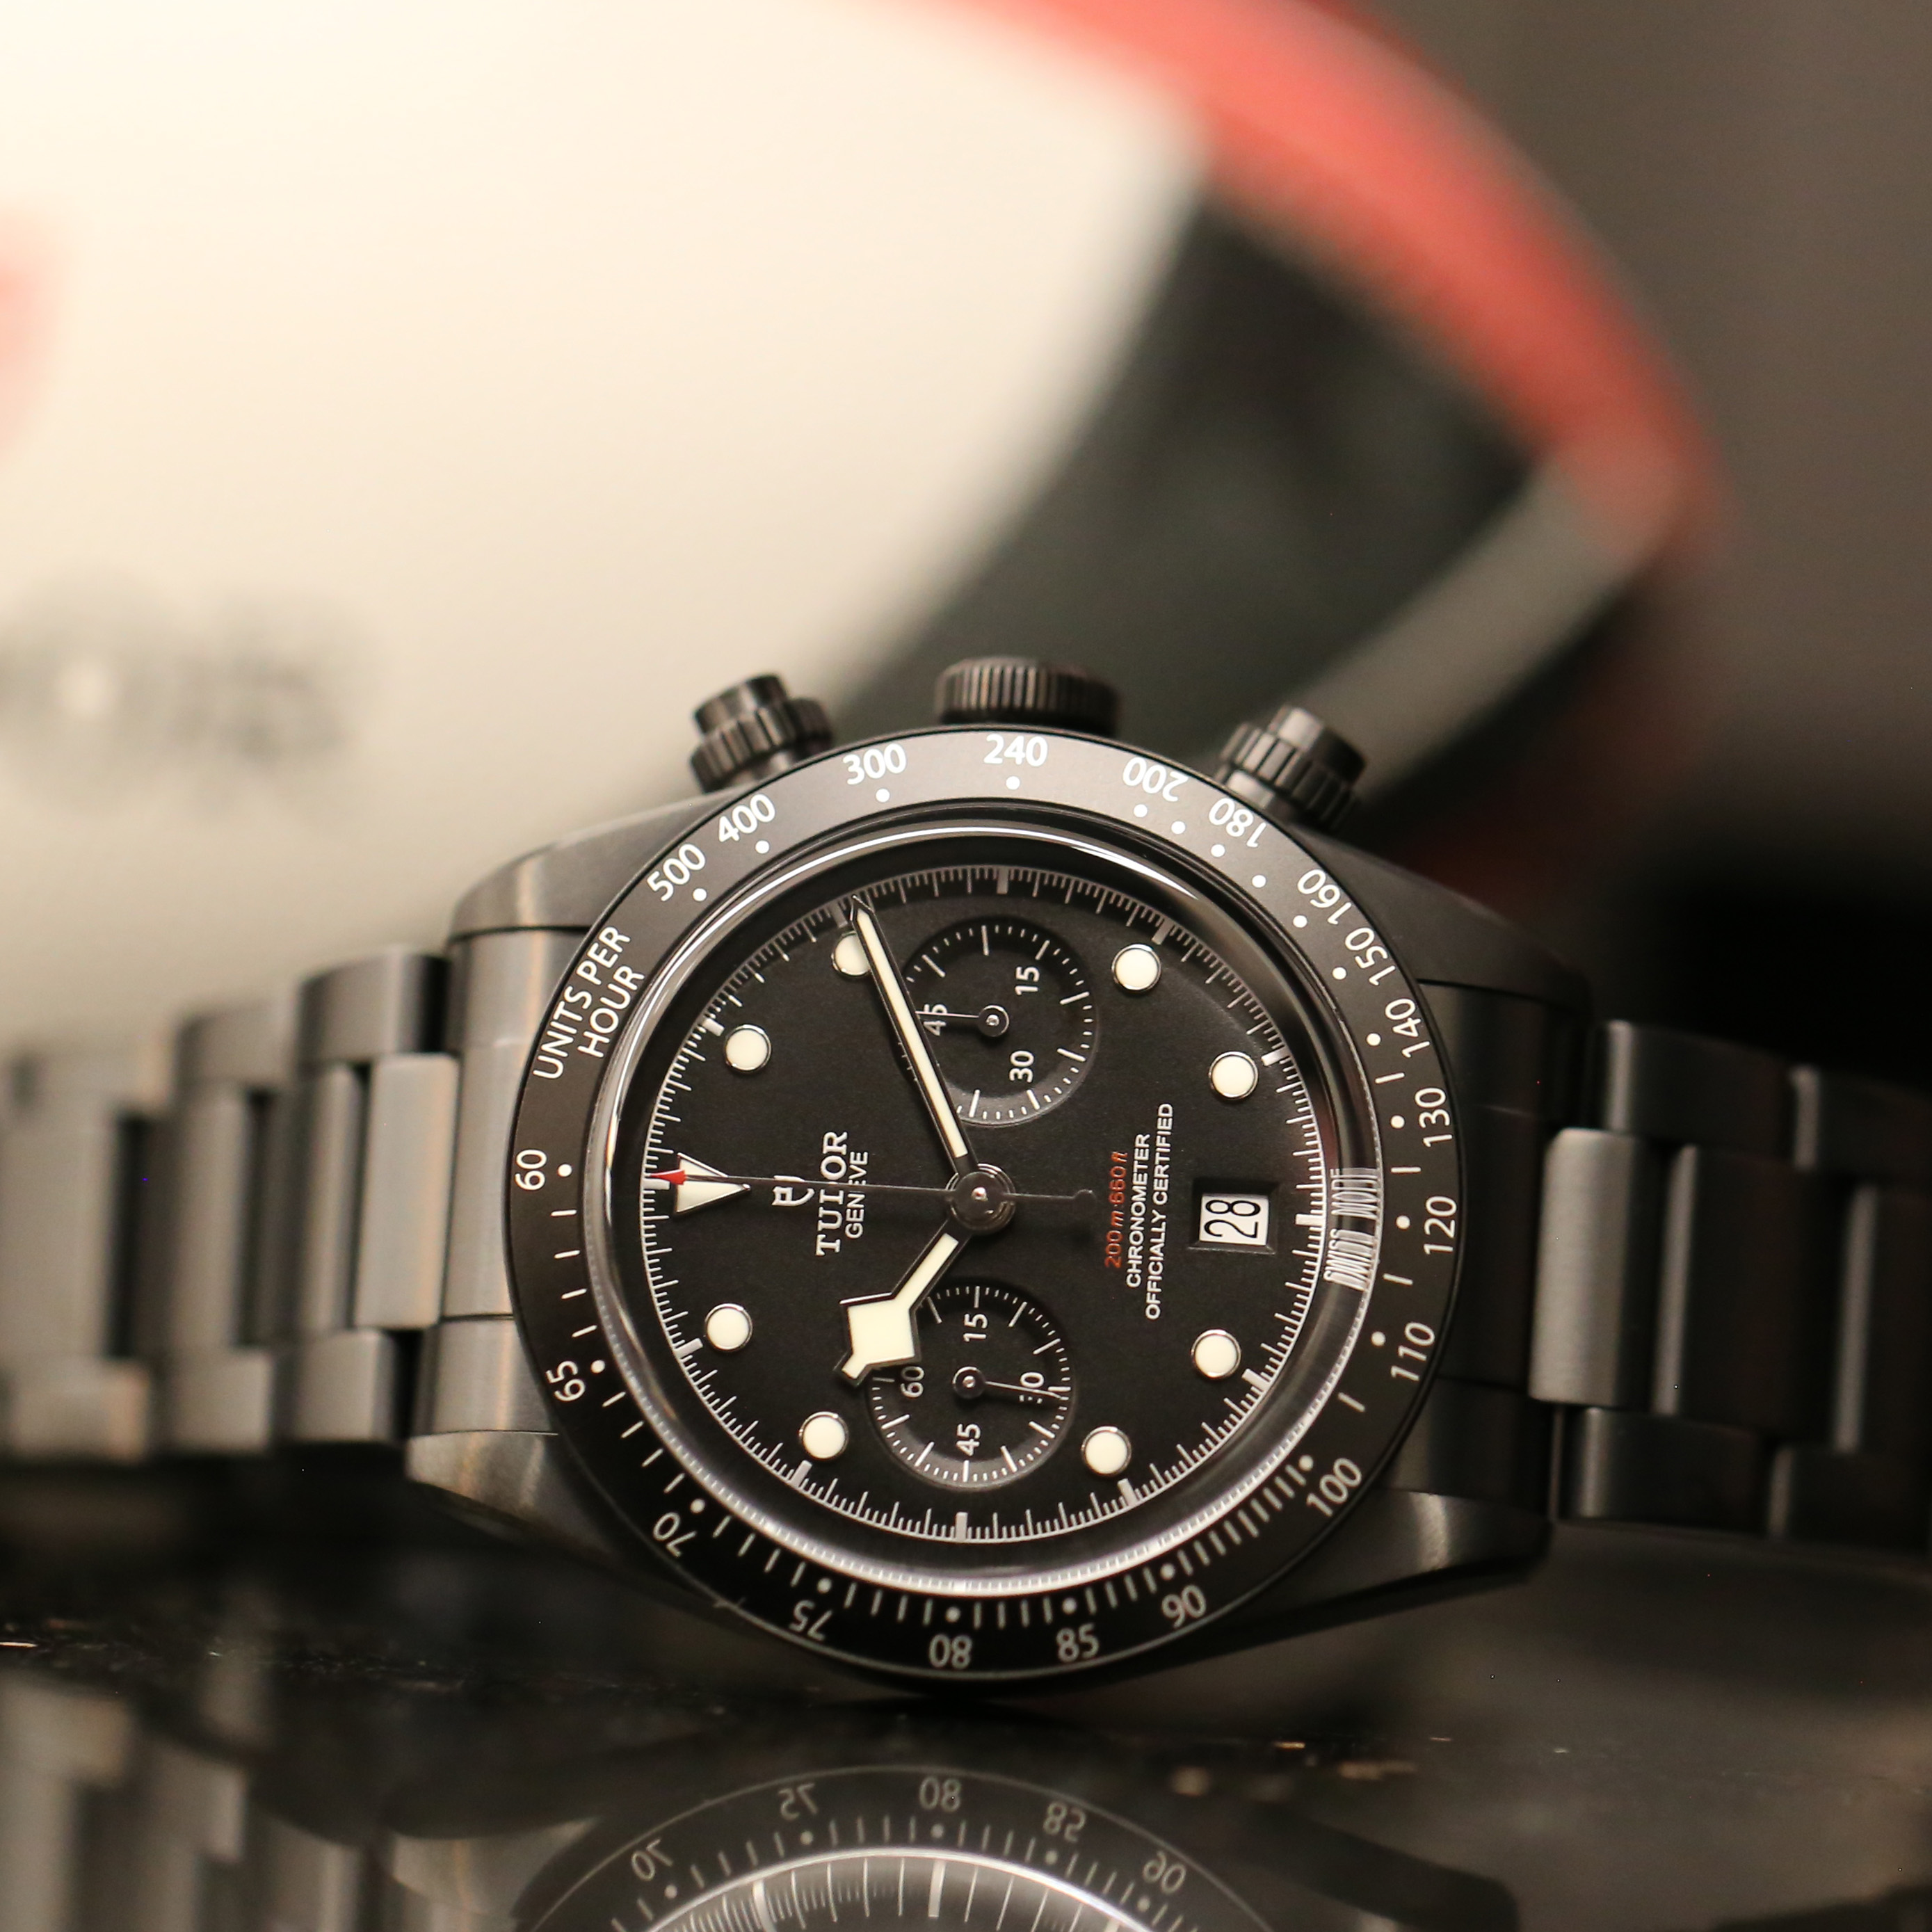 Tudors New Black Bay Chrono for the New Zealand All Blacks (with Live Images) WatchTime